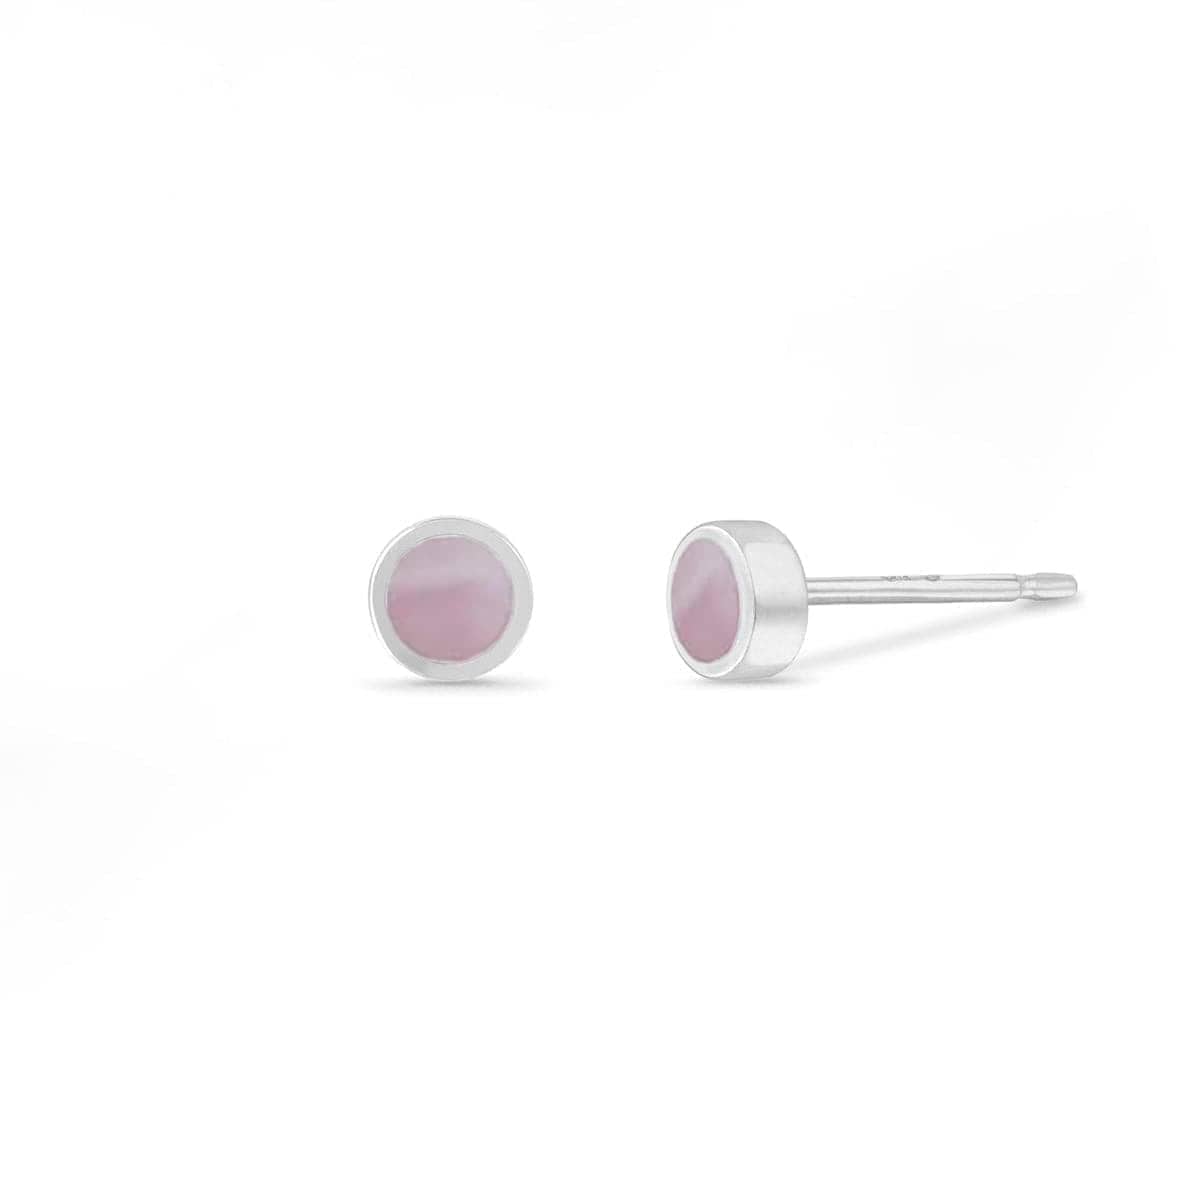 Boma Jewelry Earrings Pink Shell Belle Mini Studs with Stone